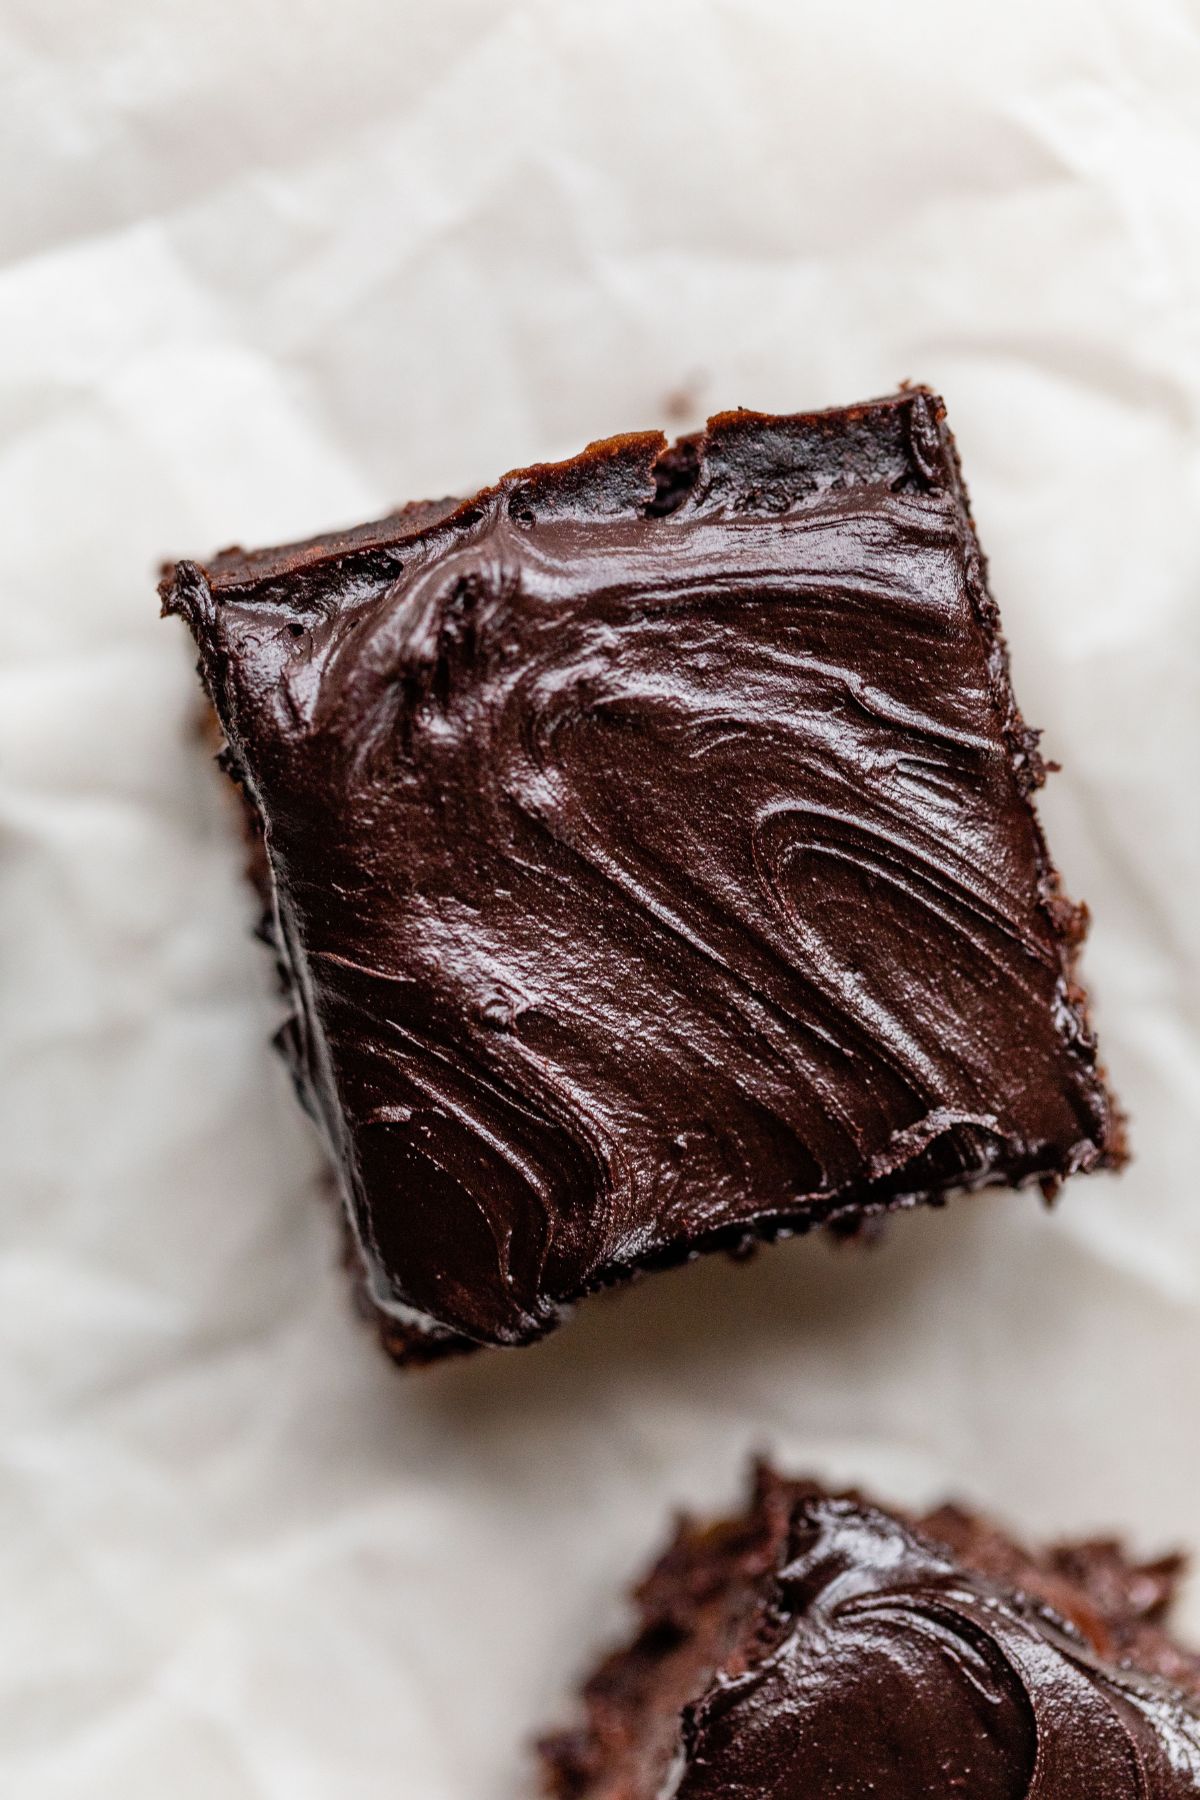 Black bean brownie topped with icing.